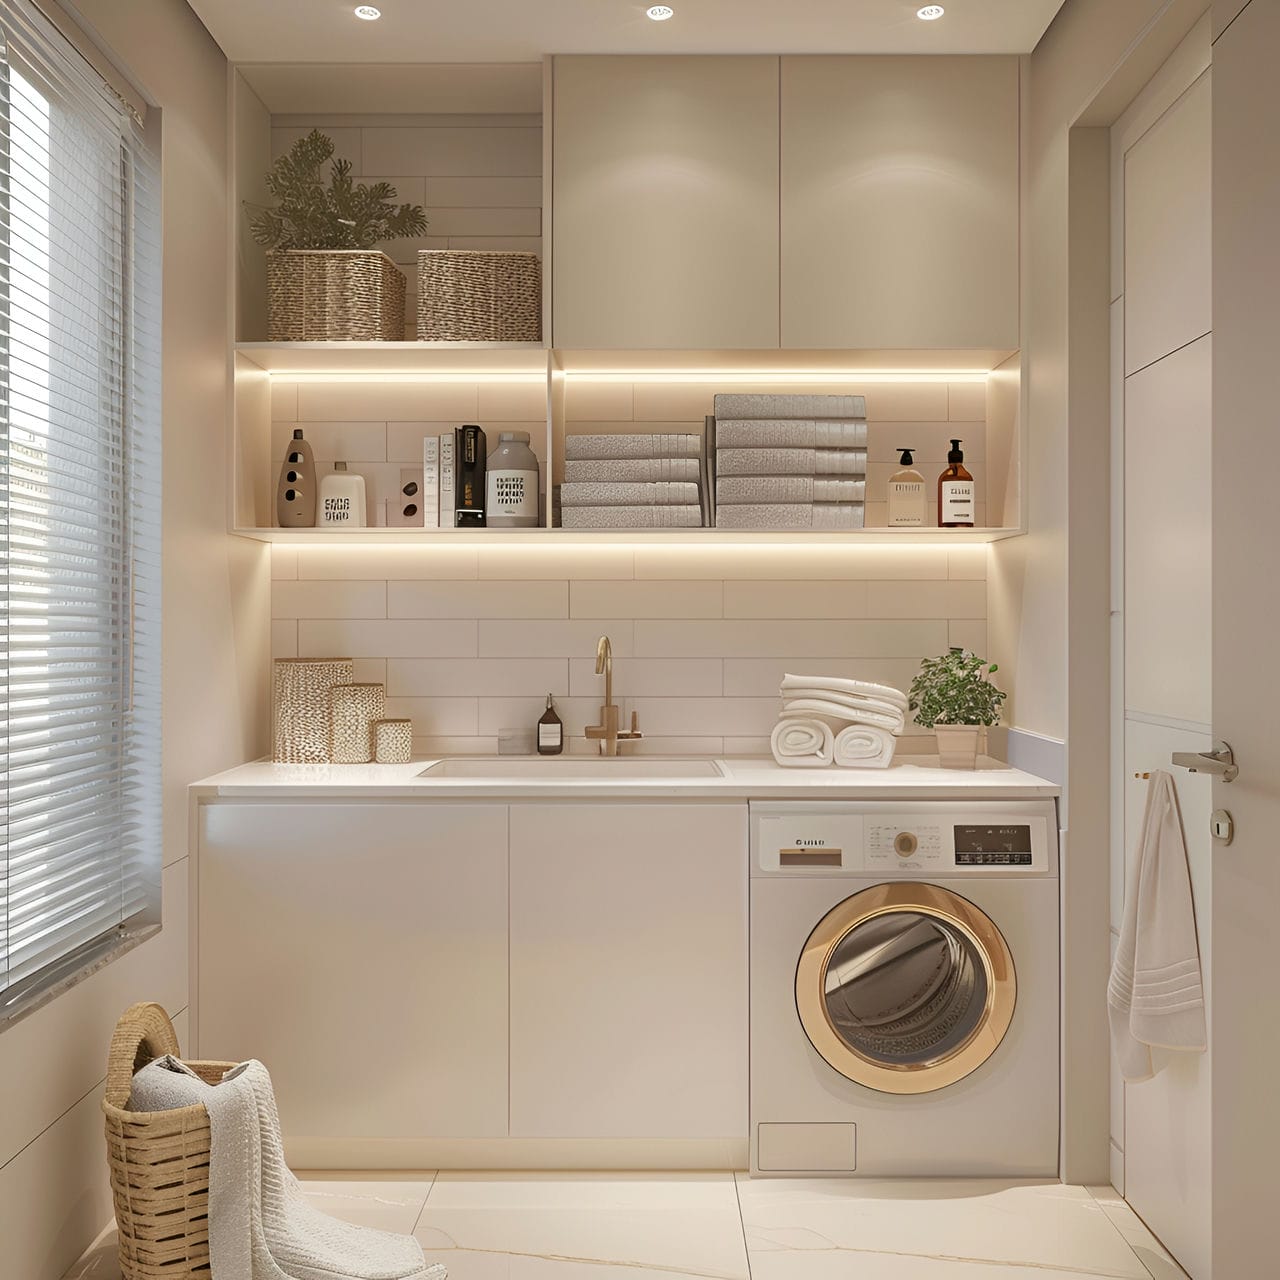 Utility room: size, functionality, uses, furniture and renovation